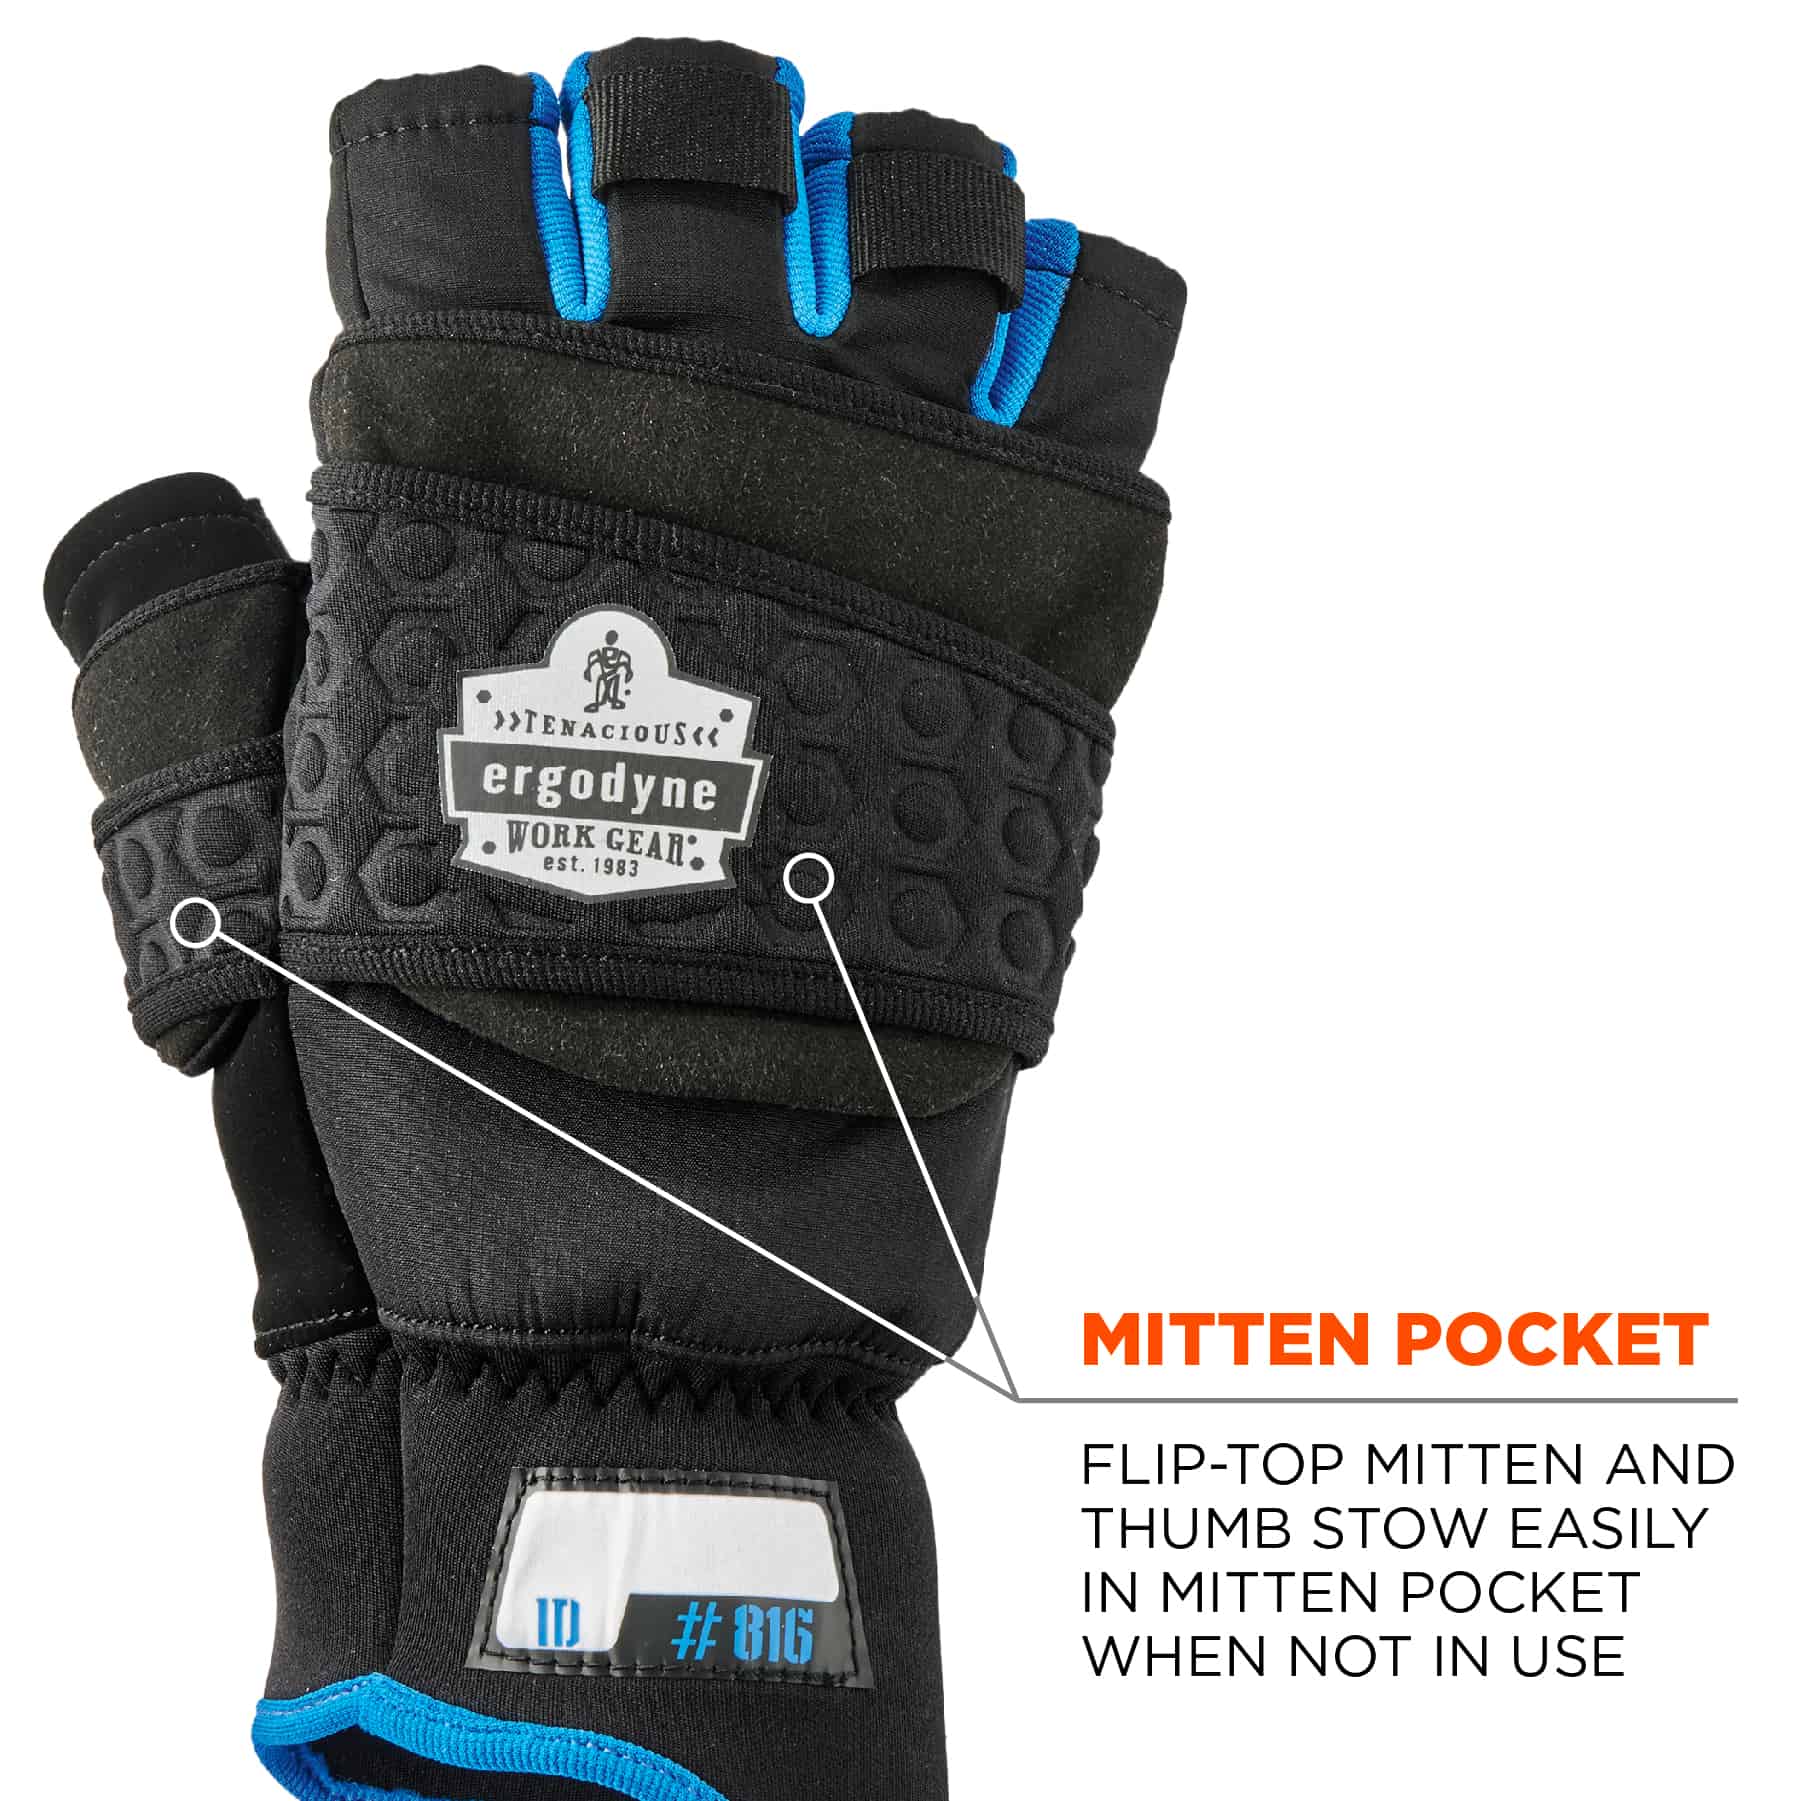 3M Thinsulated Fingerless Convertible Mitten Gloves, Insulated Ice